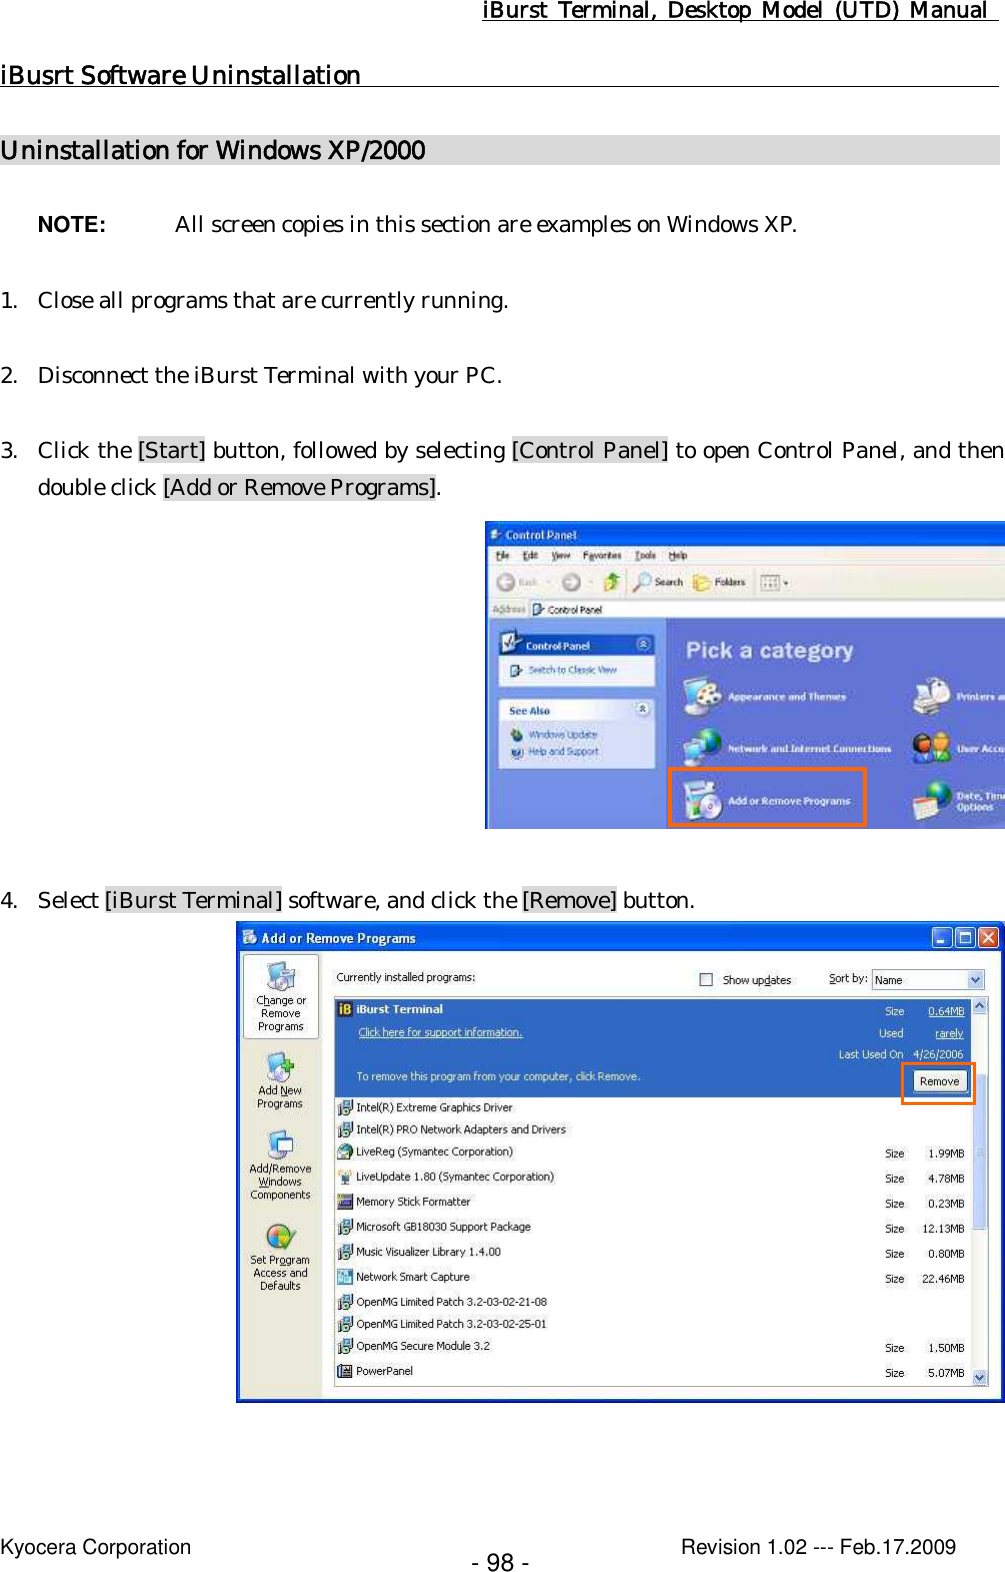 iBurst  Terminal, Desktop  Model  (UTD)  Manual    Kyocera Corporation                                                                                              Revision 1.02 --- Feb.17.2009 - 98 - iBusrt Software Uninstallation                                                     Uninstallation for Windows XP/2000                                                NOTE:  All screen copies in this section are examples on Windows XP.  1. Close all programs that are currently running.  2. Disconnect the iBurst Terminal with your PC.  3. Click the [Start] button, followed by selecting [Control Panel] to open Control Panel, and then double click [Add or Remove Programs].     4. Select [iBurst Terminal] software, and click the [Remove] button.   